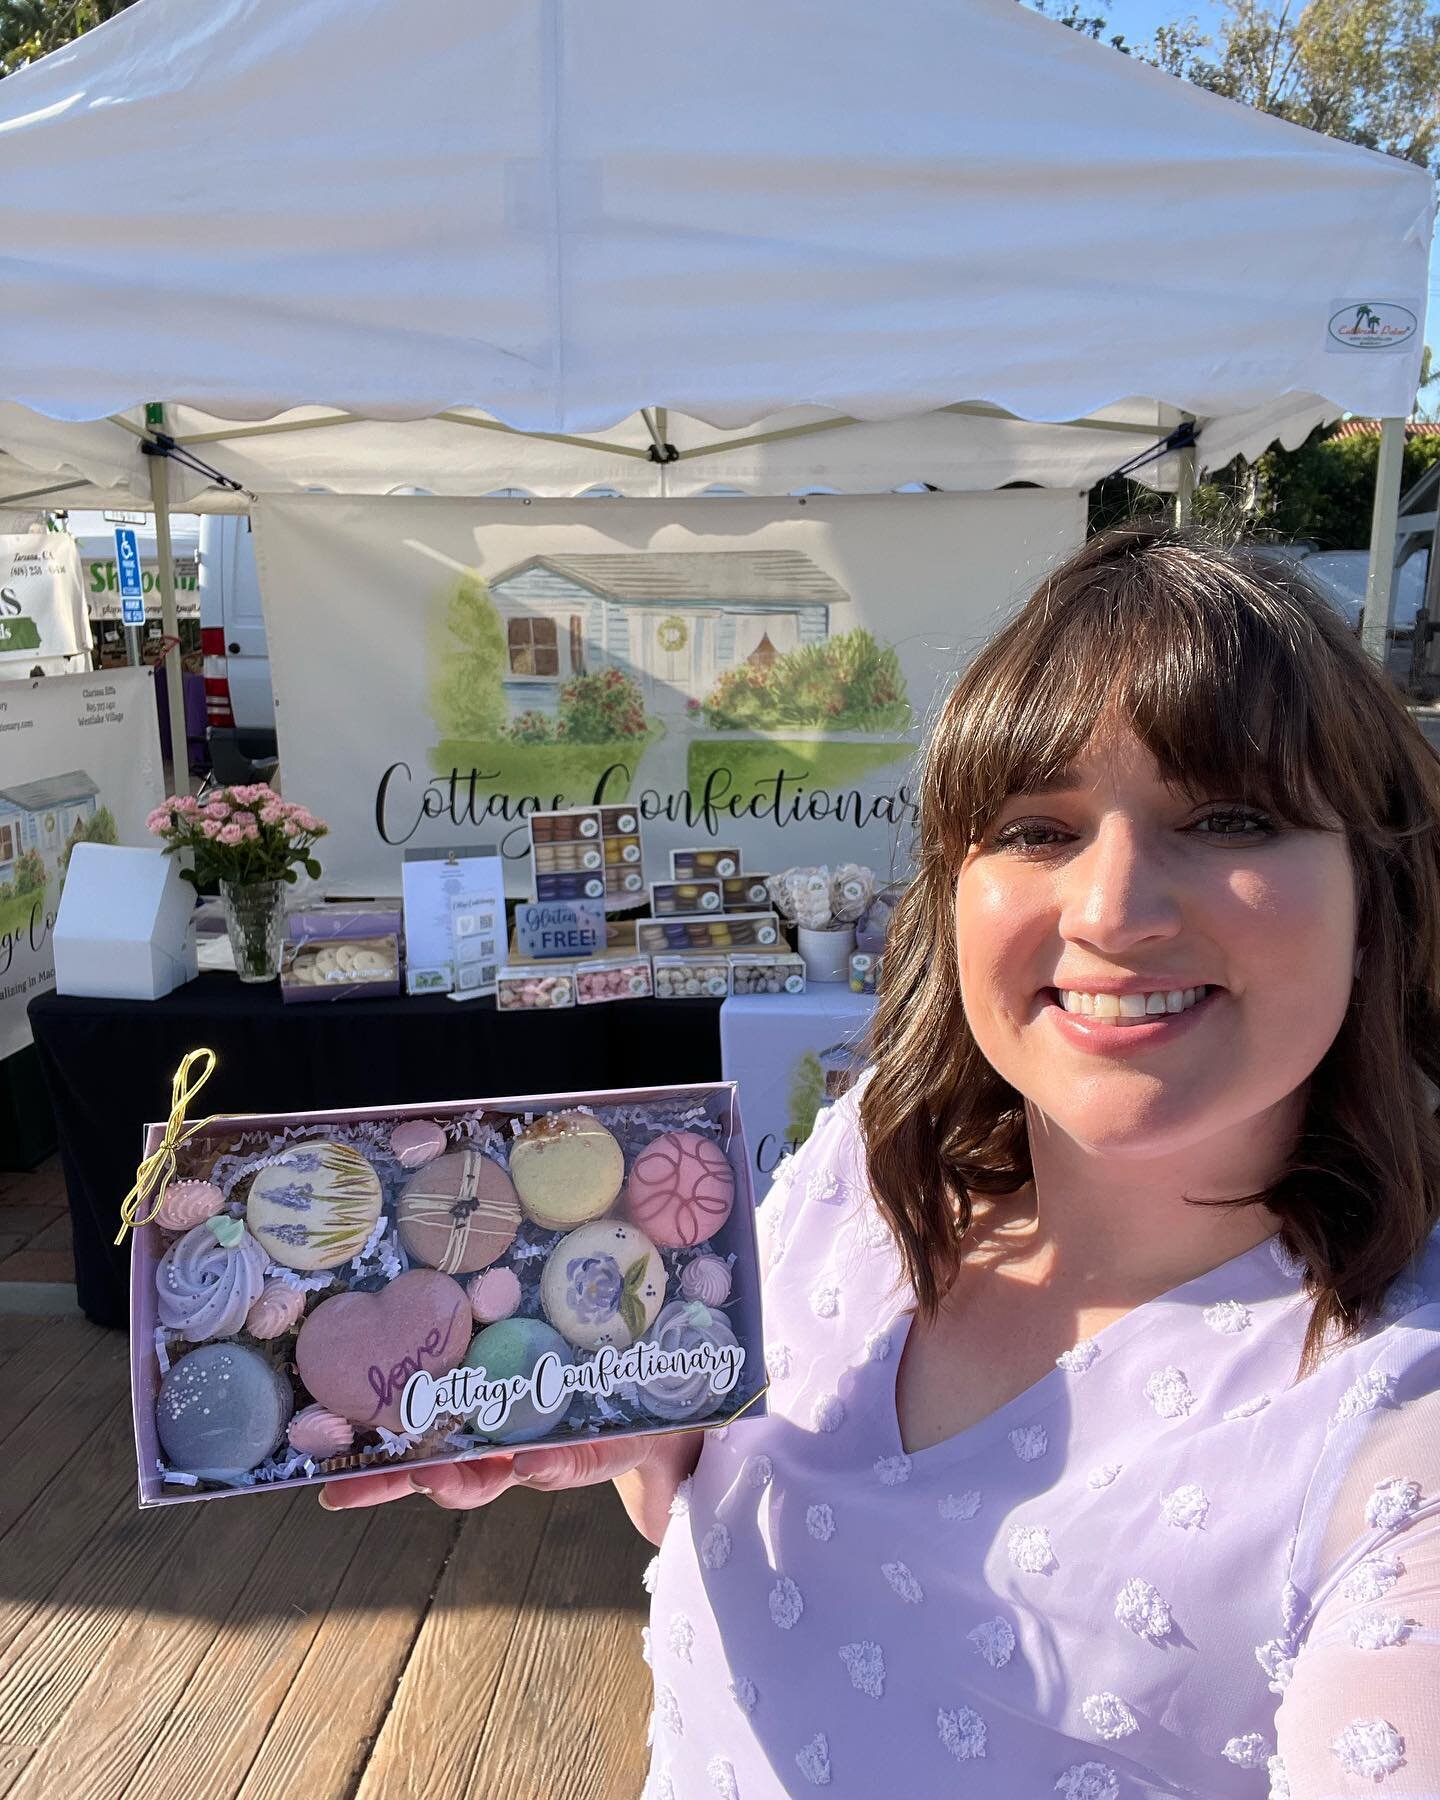 Mother&rsquo;s Day weekend is here! 🥳 

I will be at the Calabasas Farmer&rsquo;s Market today from 8 am - 1 pm! I&rsquo;ve got the gorgeous Mother&rsquo;s Day Gift Sets, Lavender Shortbread, Let&rsquo;s Do Brunch Packs, and more! 

Get your Momma w